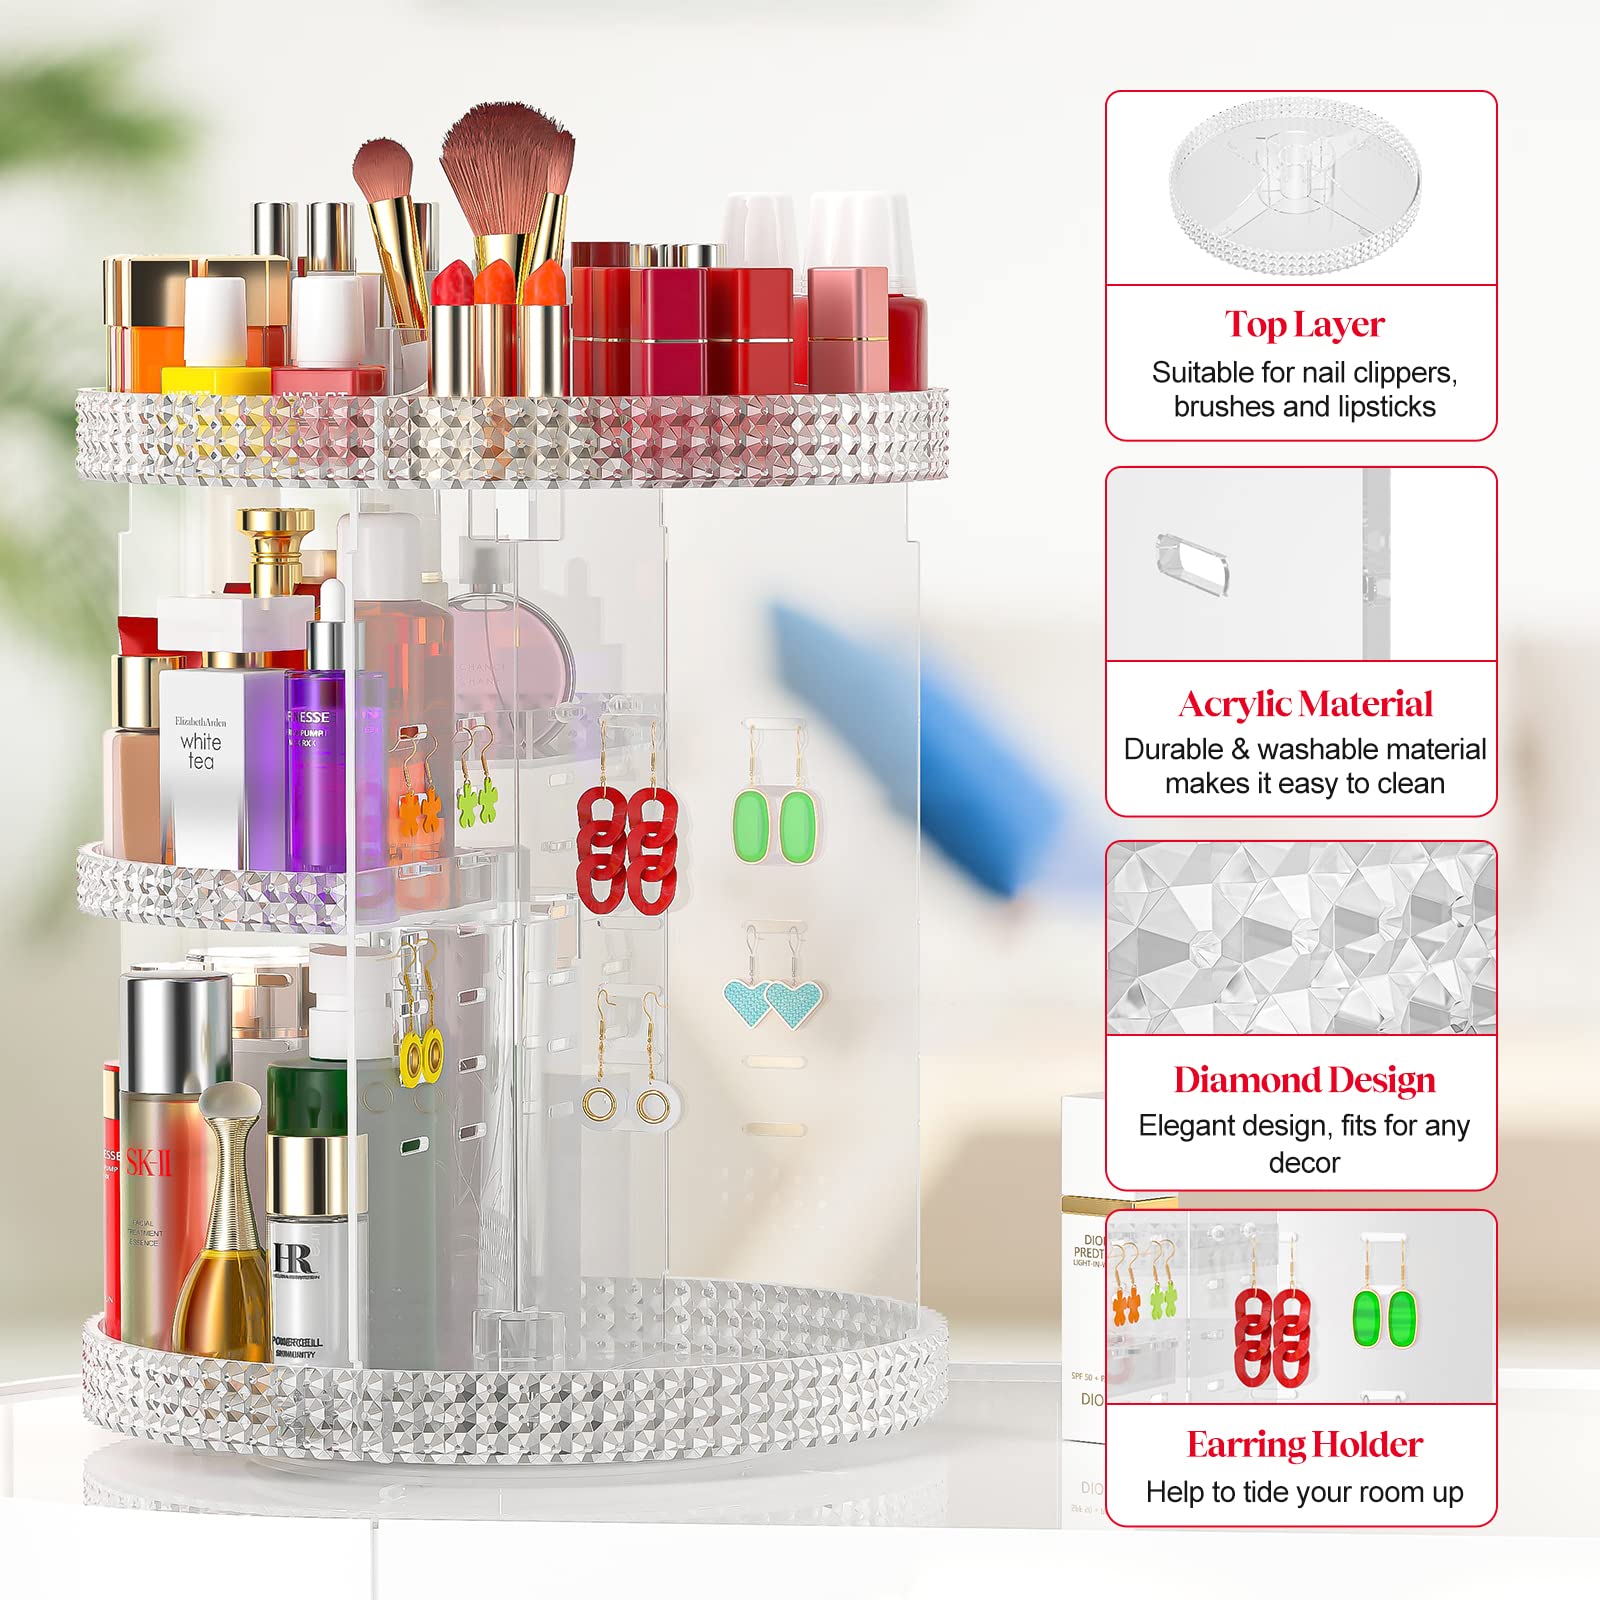 Awenia Makeup Organizer 360-Degree Rotating, Adjustable Makeup Storage, 7 Layers Large Capacity Cosmetic Storage Unit,Fits Different Types of Cosmetics and Accessories, Plus Size(Acrylic Clear)